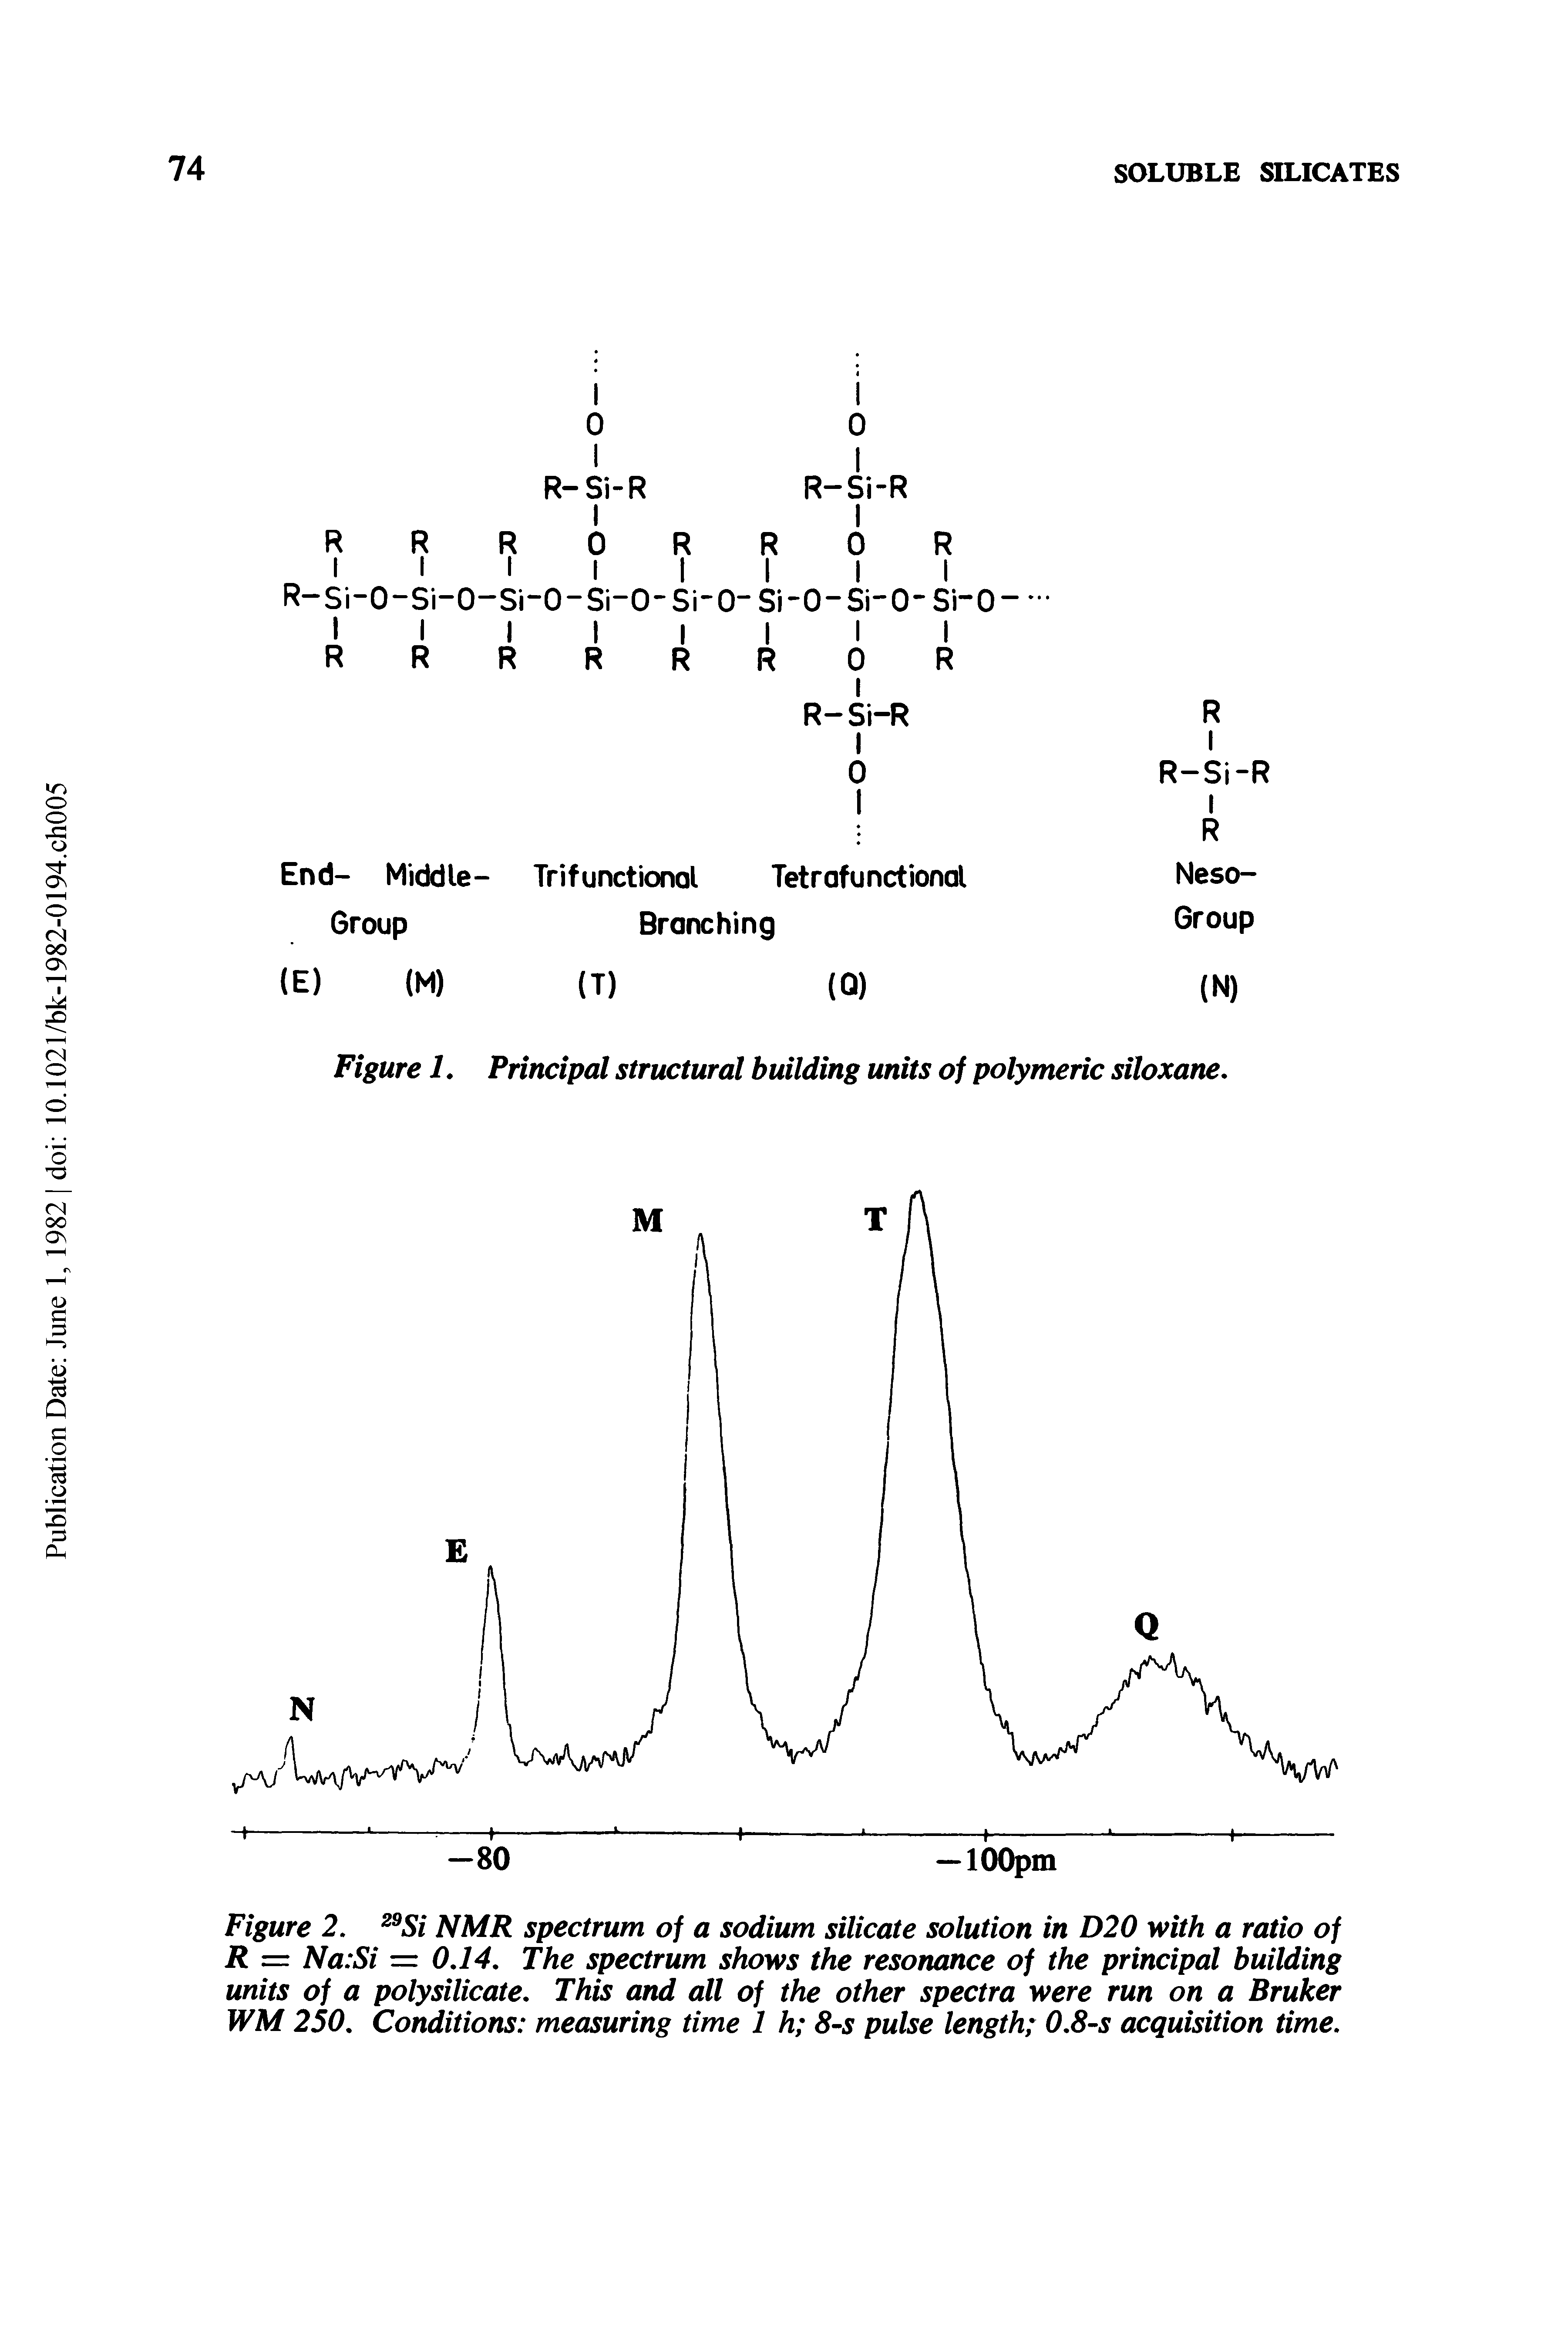 Figure 2. NMR spectrum of a sodium silicate solution in D20 with a ratio of R = Na Si =0,14, The spectrum shows the resonance of the principal building units of a poly silicate. This and all of the other spectra were run on a Bruker WM 250, Conditions measuring time 1 h 8-s pulse length 0,8-s acquisition time.